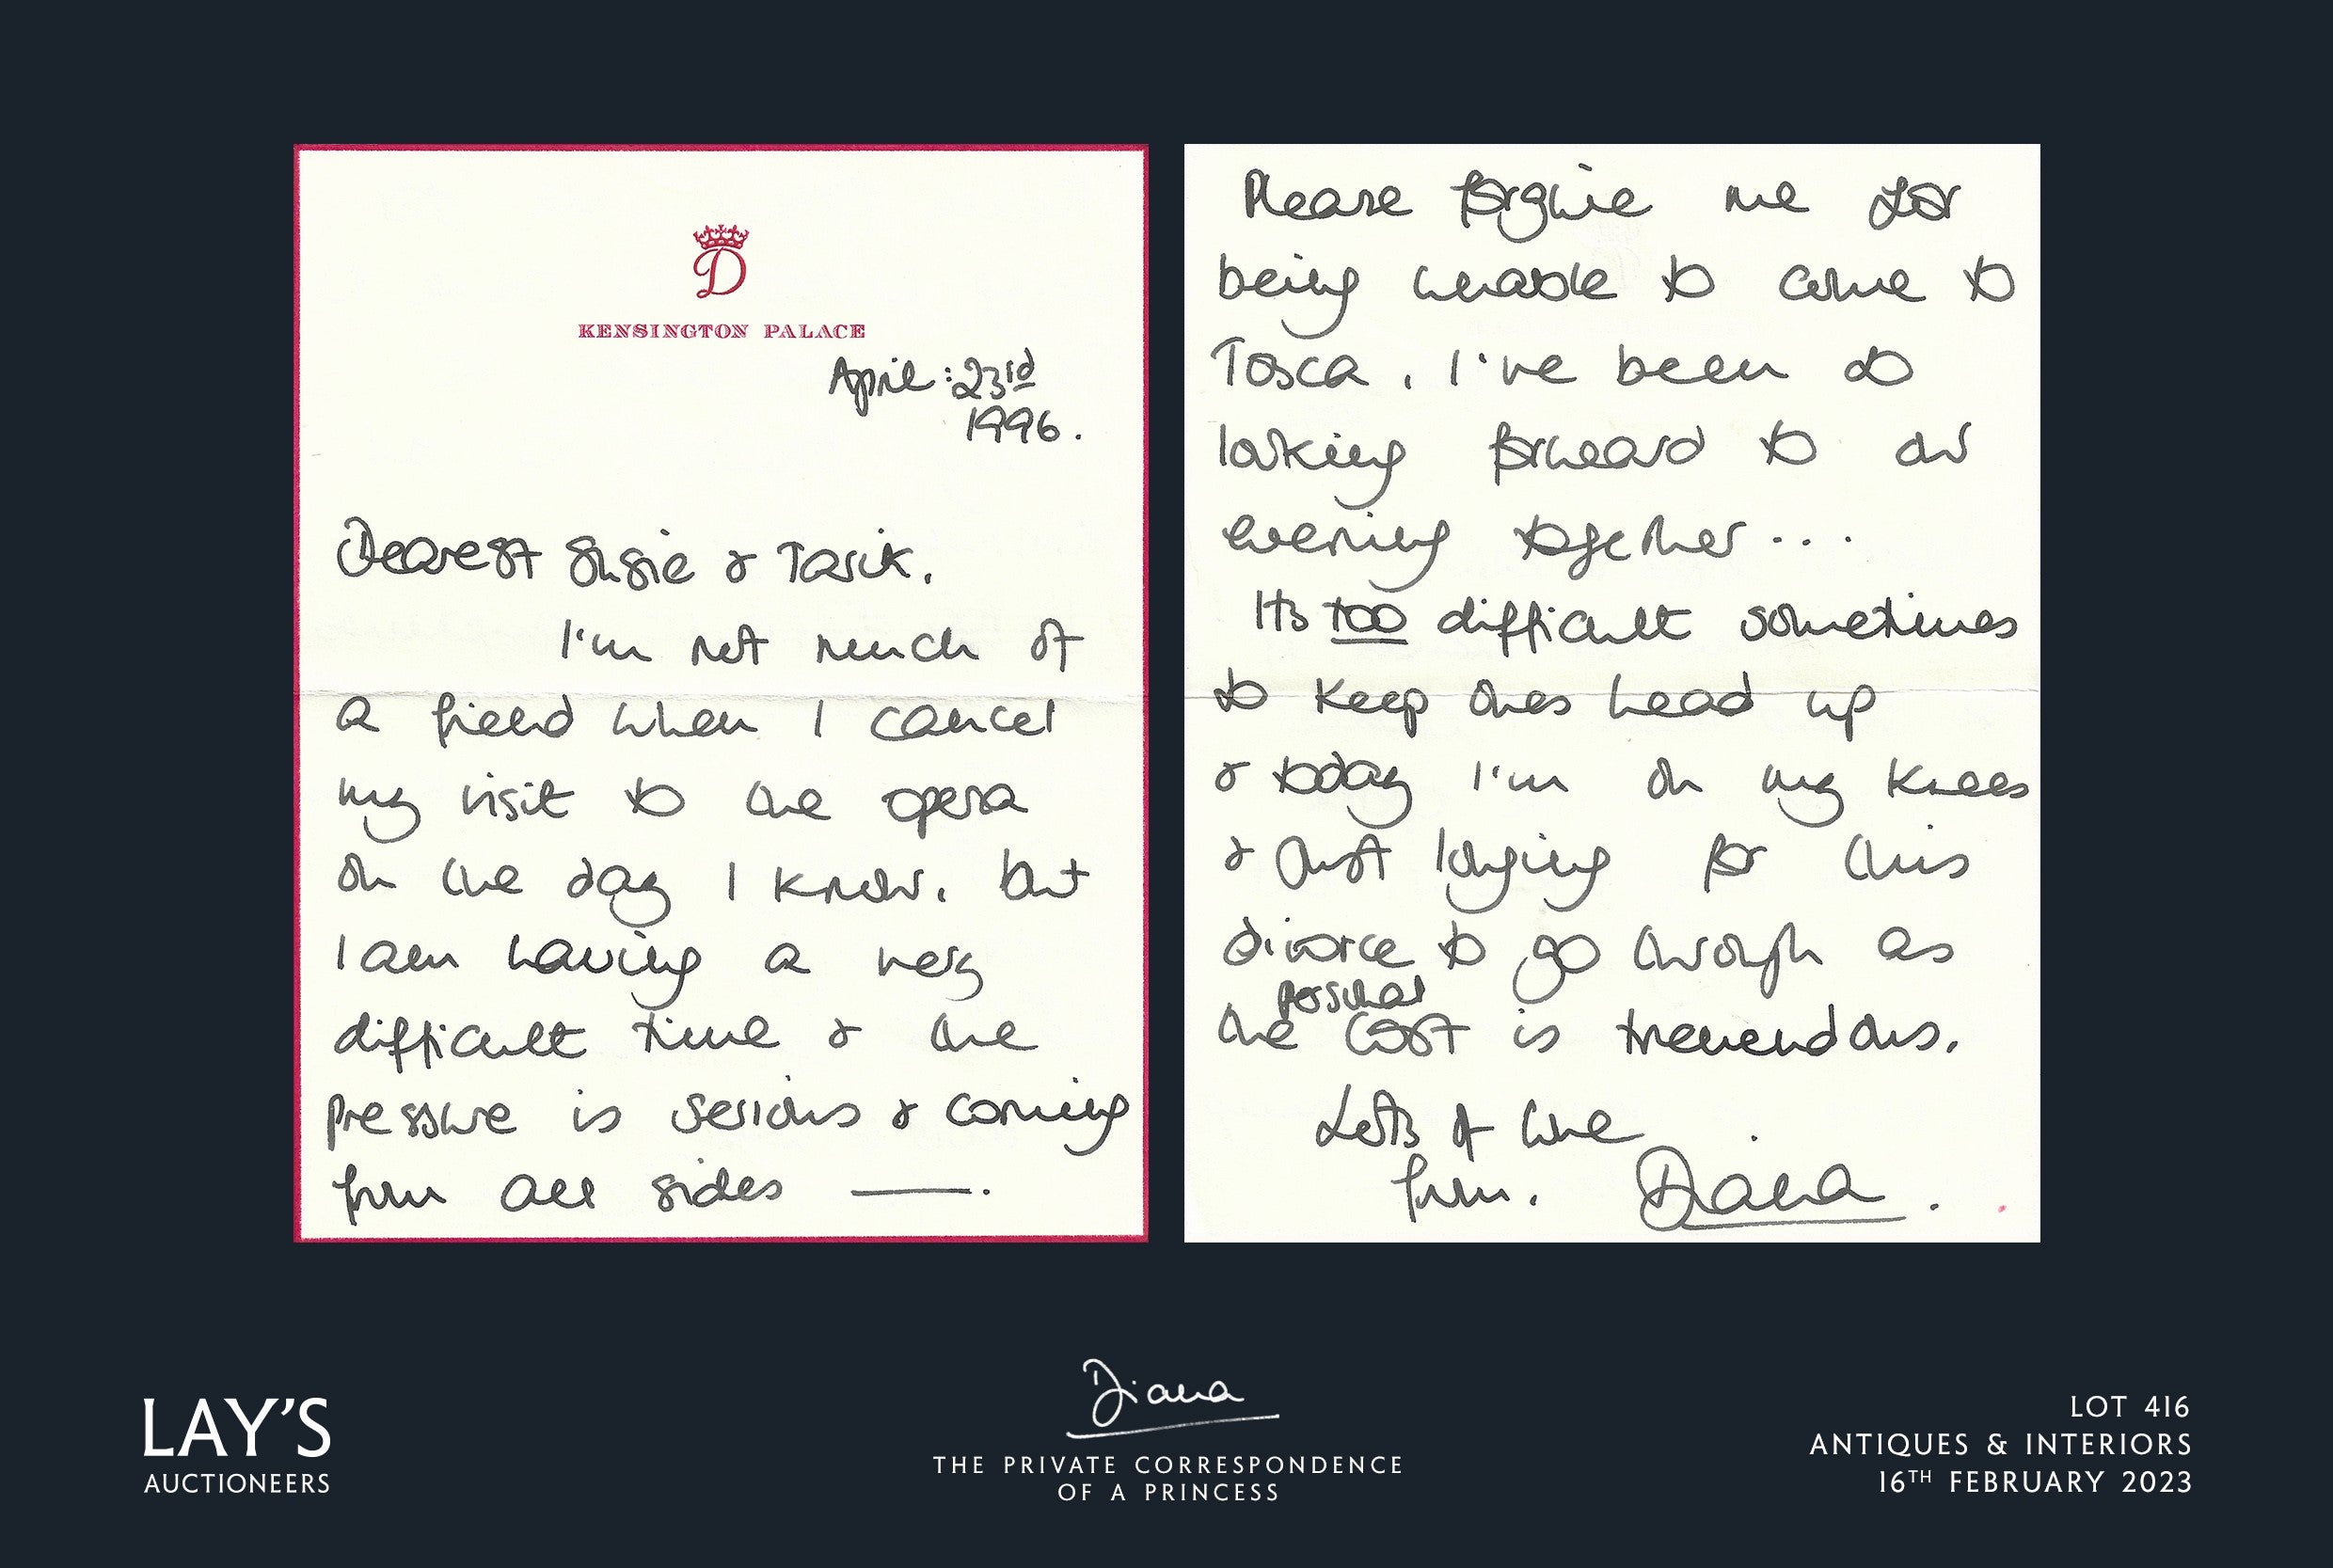 A letter from Diana to her close friends Susie and Tarek Kassem